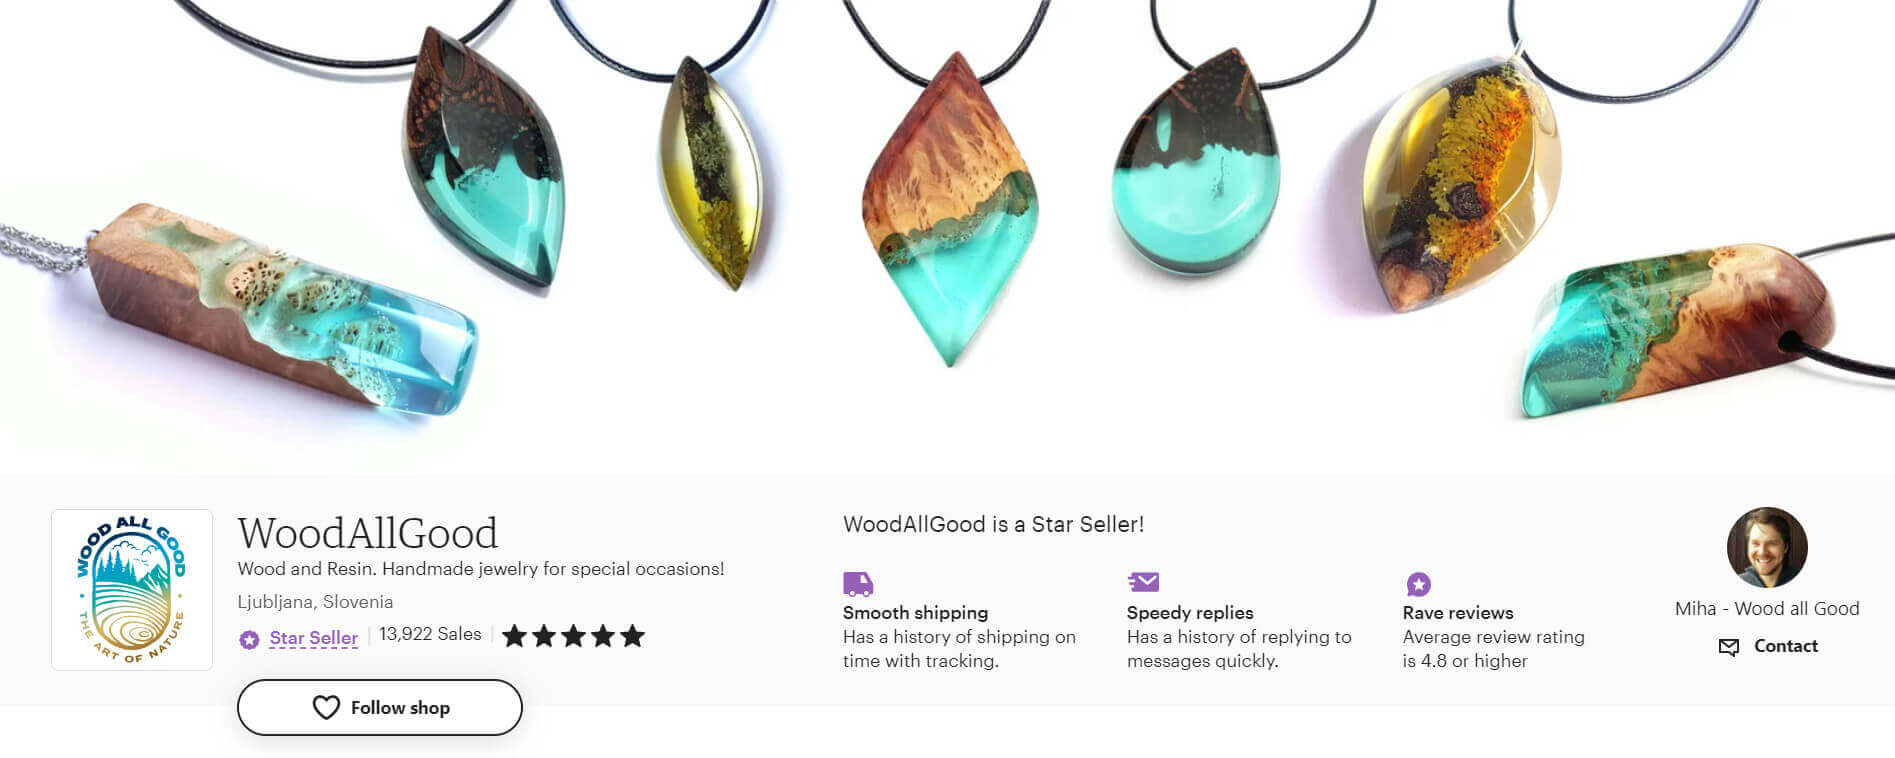 WoodAllGood uses a stunning photo of wood and handcrafted jewelry on its banner